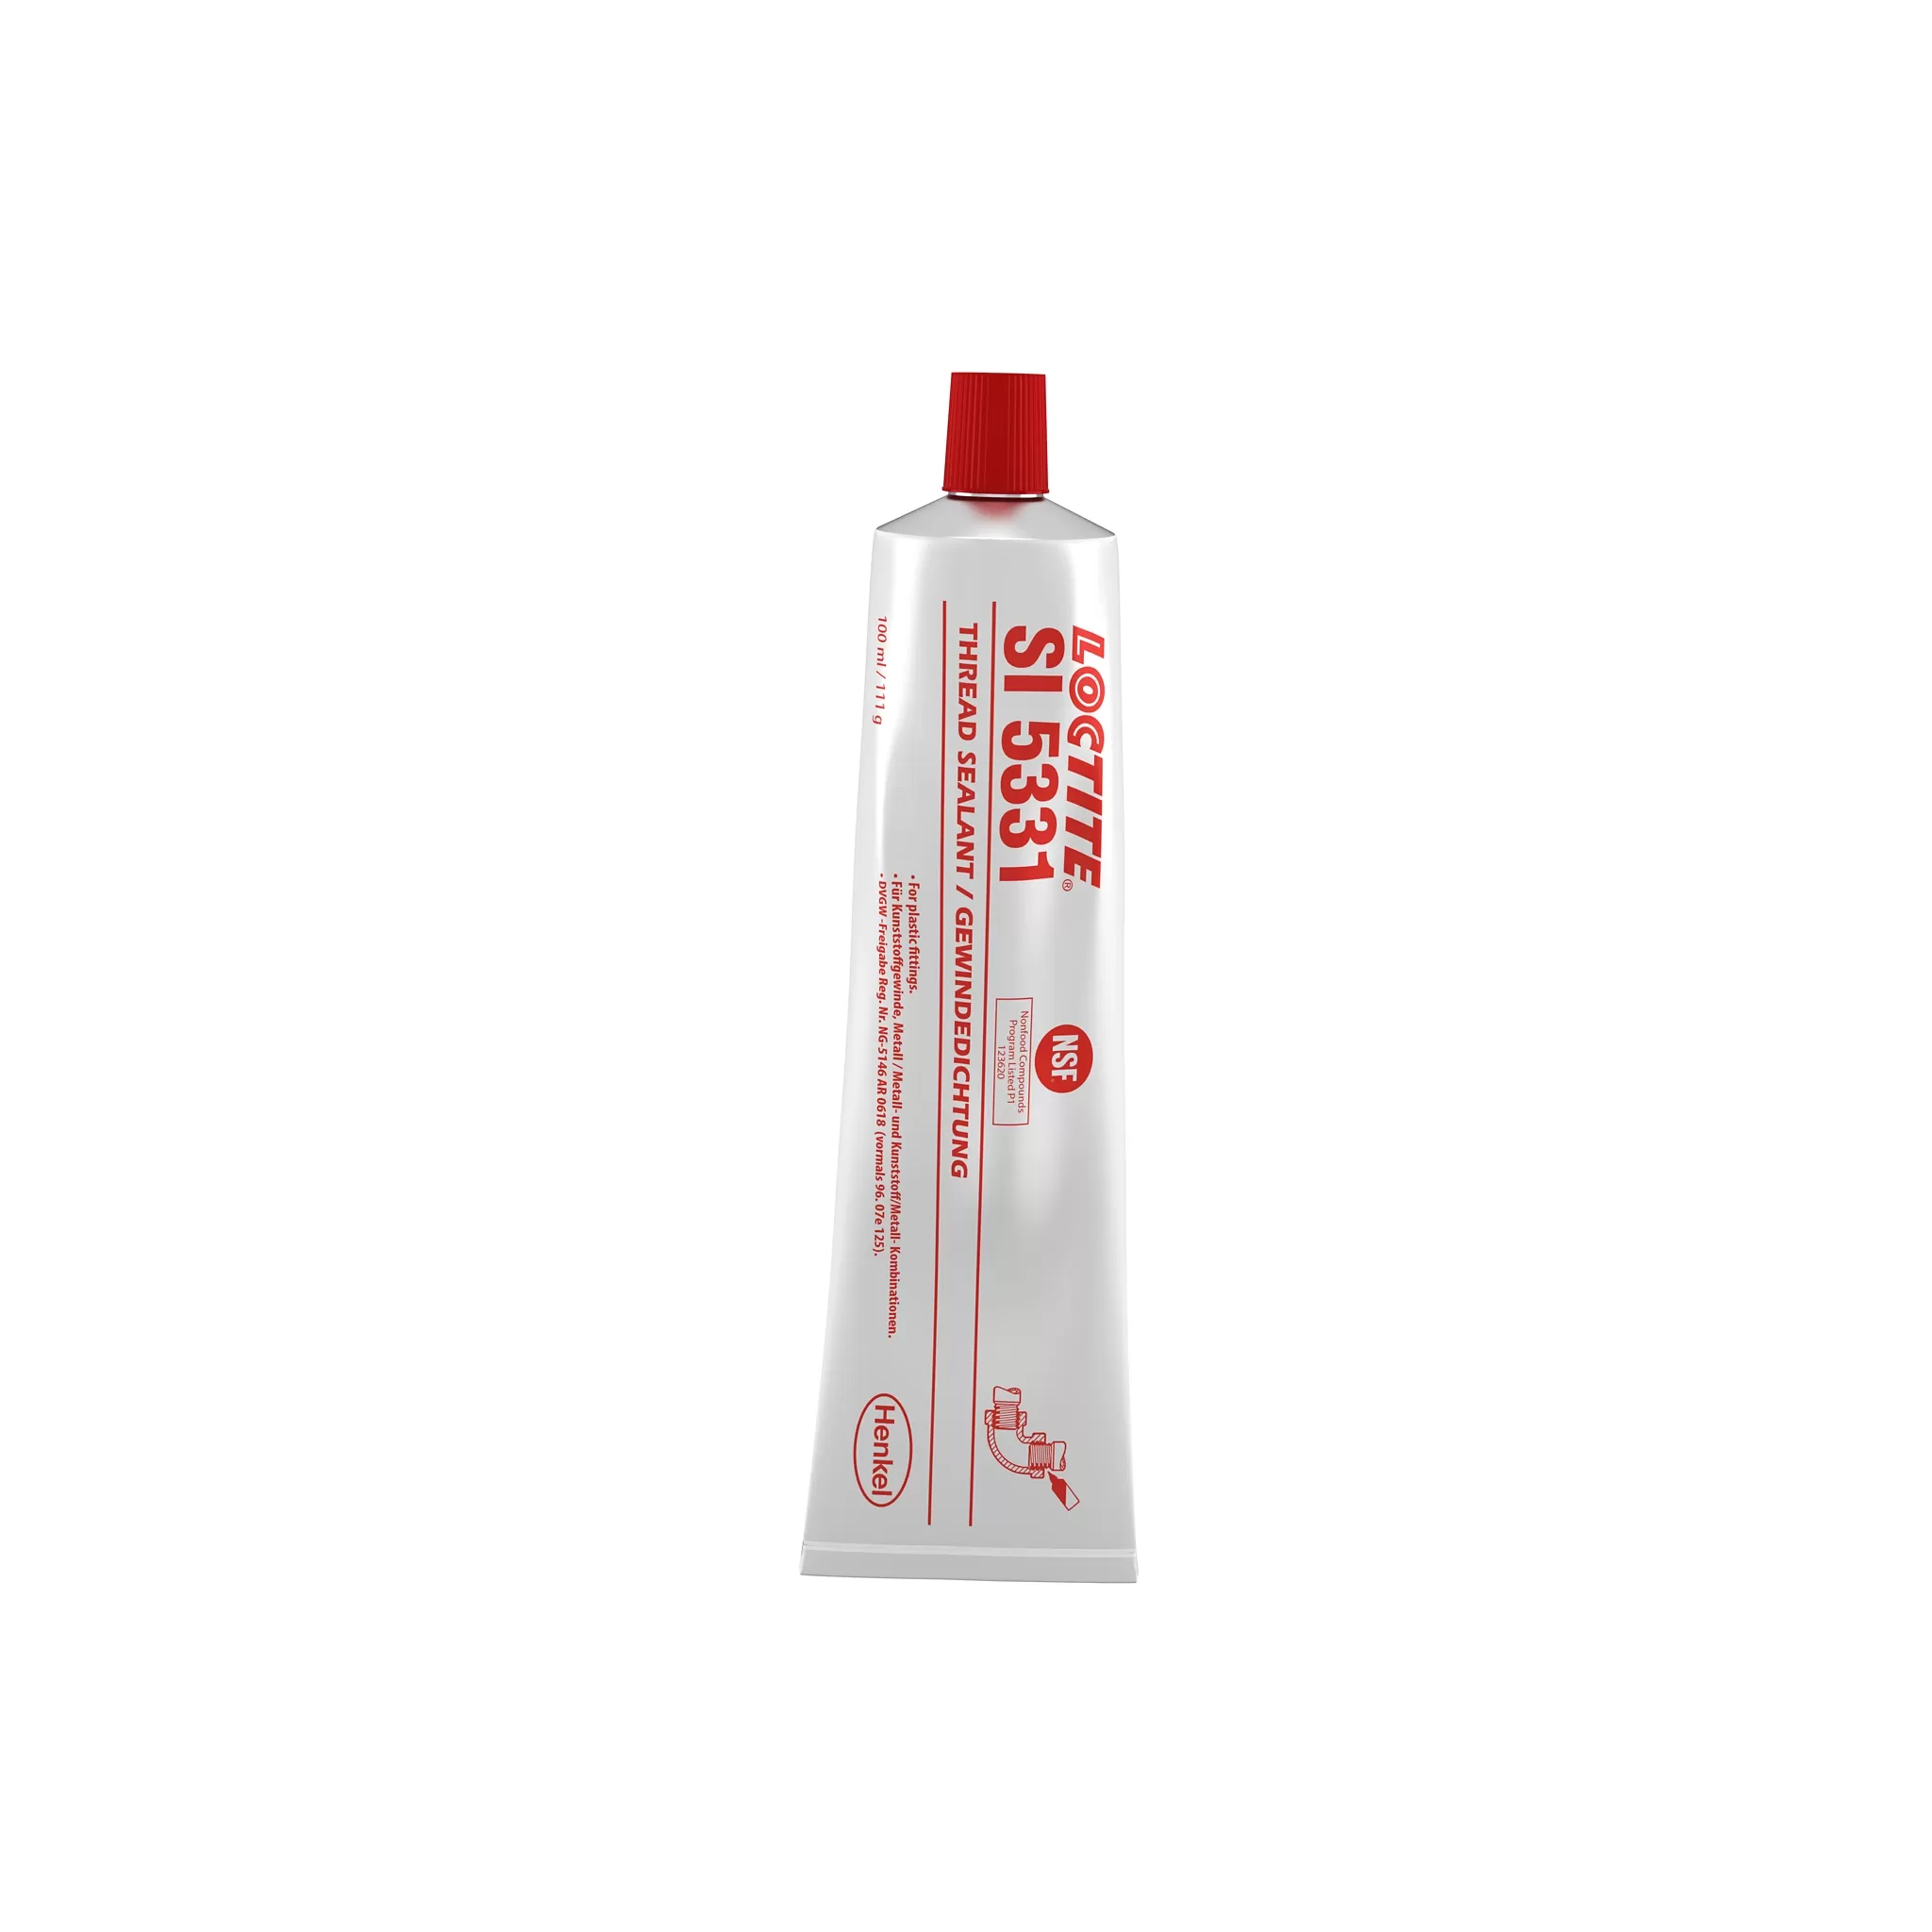 Keo loctite 5331-100ml (white, low strength silicone based thread sealant)